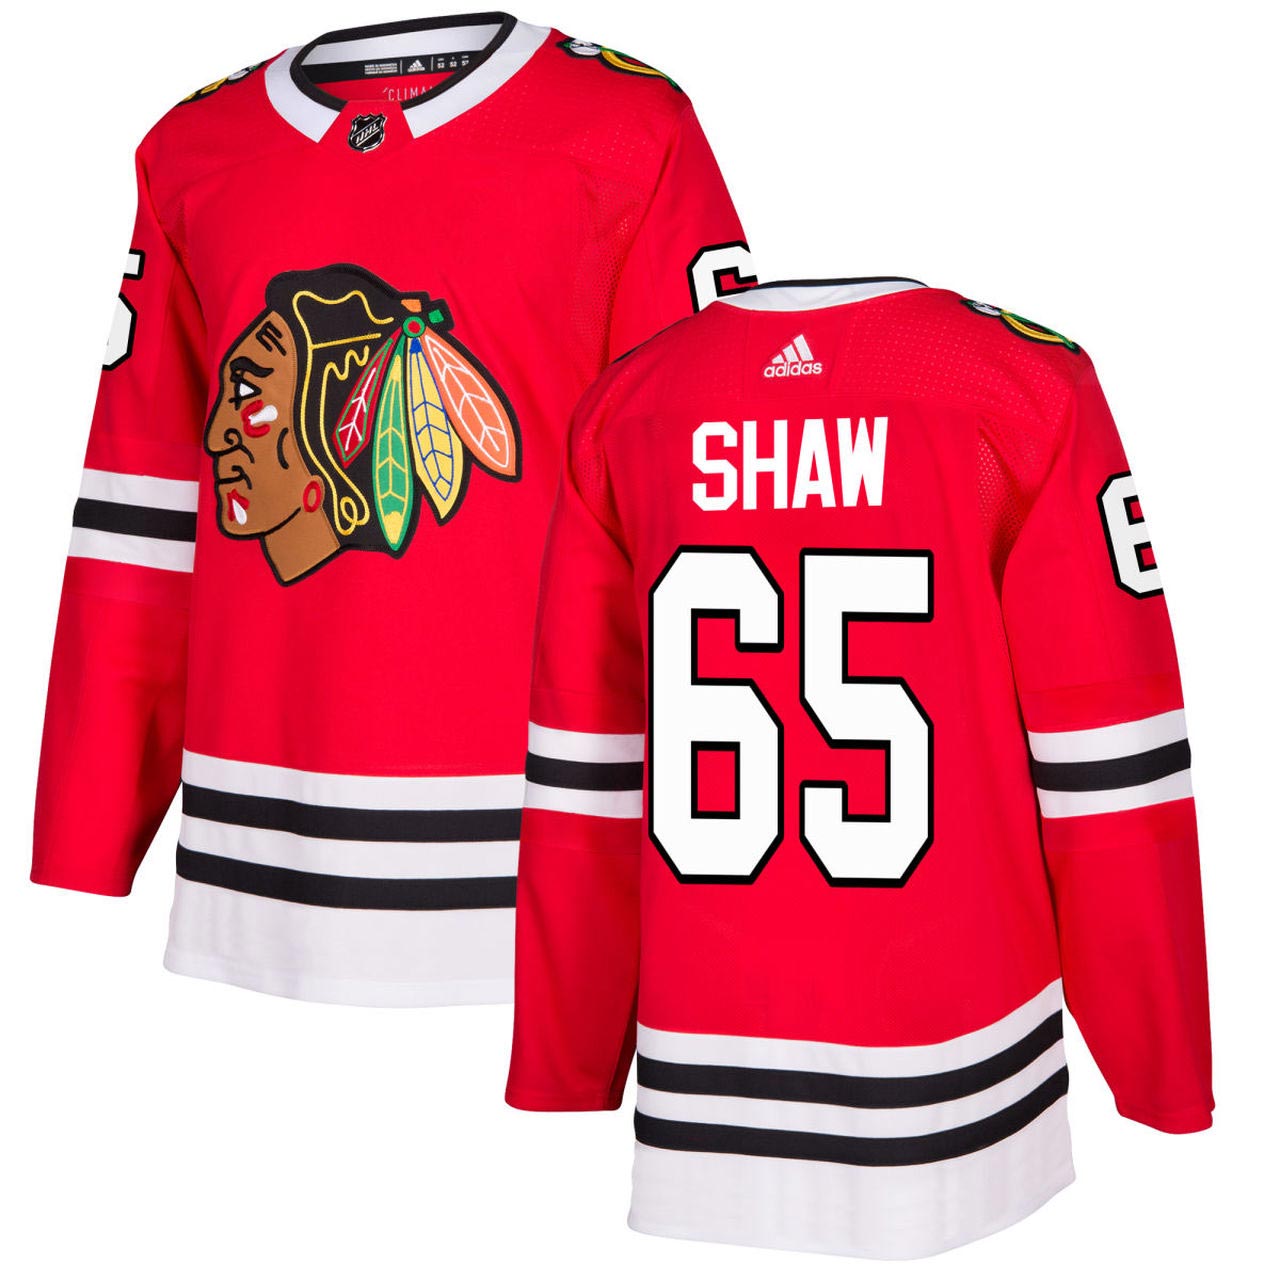 Chicago Blackhawks #65 Andrew Shaw Green Jersey on sale,for Cheap